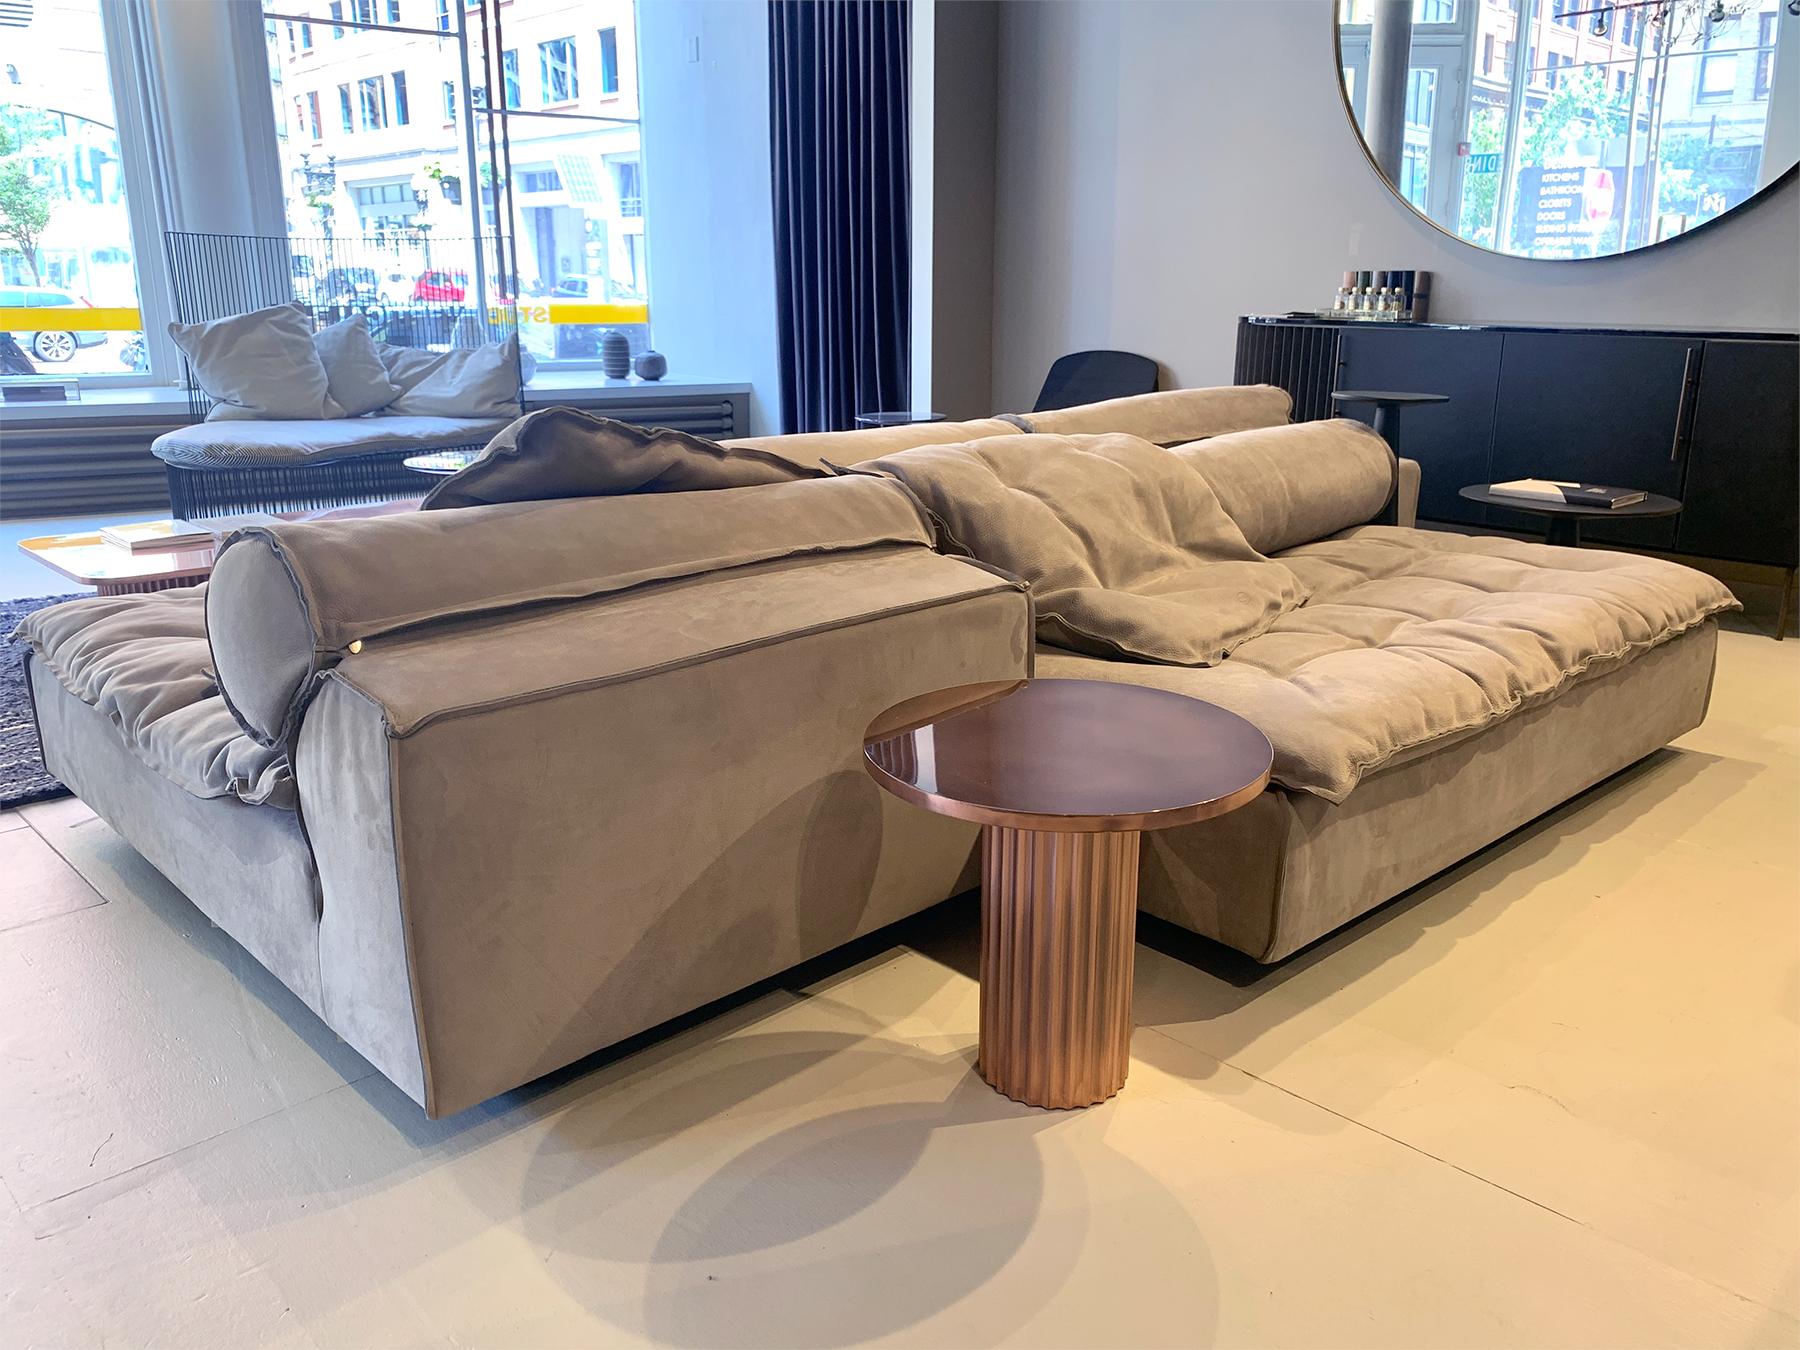 Miami Soft Sectional Sofa by Paola Navone for Baxter.

Made in Italy.

7-piece multi-directional modular sofa. Modules can be arranged differently from what's shown on the picture.

Baxter Miami Soft sofa, designed by Paola Navone is a soft hug that